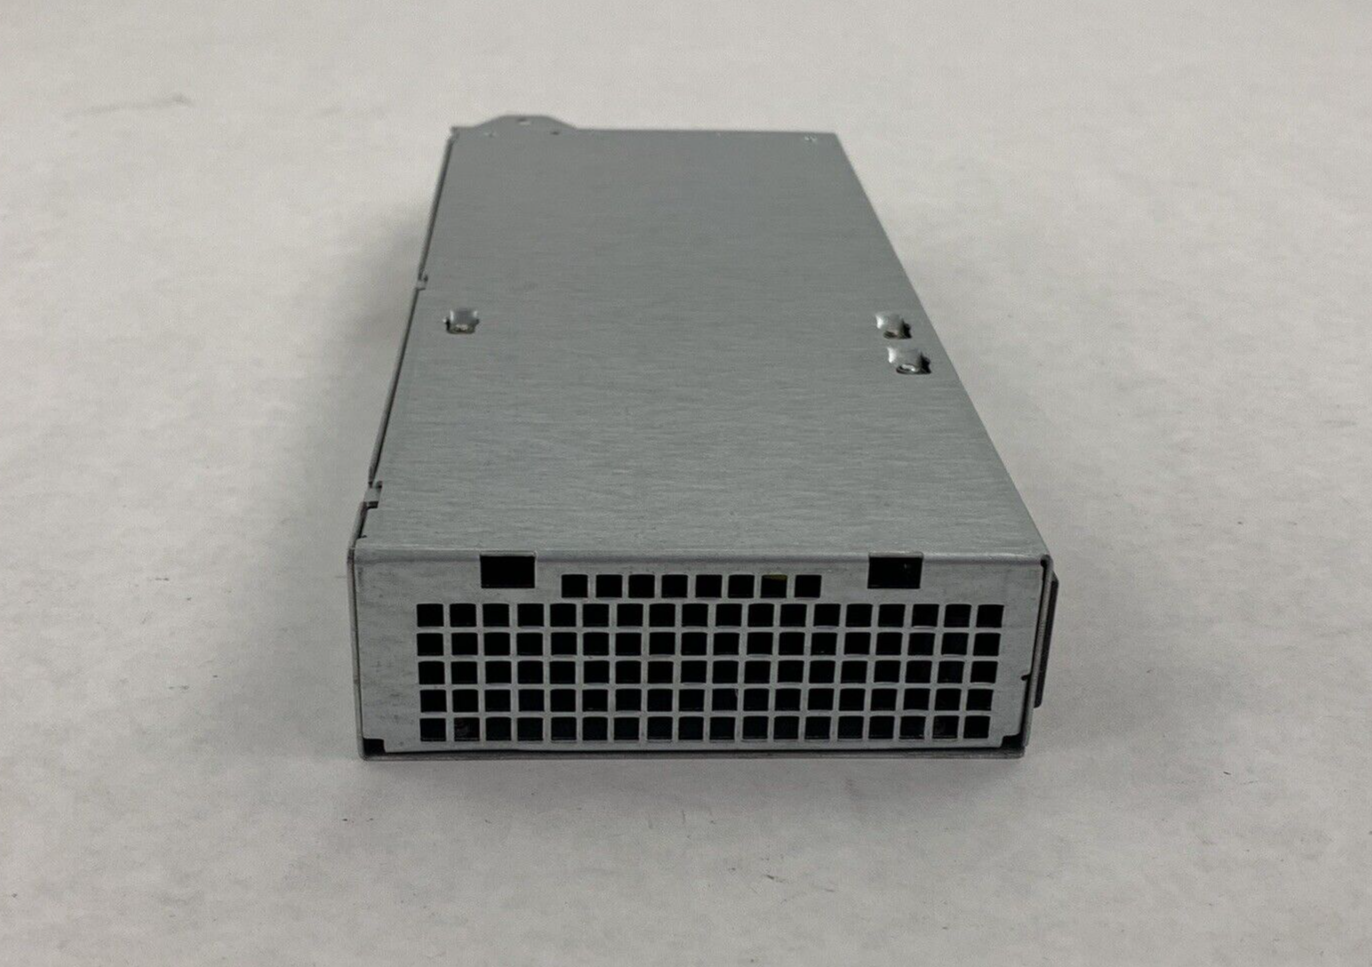 Cisco 341-0065-01 2811 Router Lite-On 125W Power Supply PA-1131-2